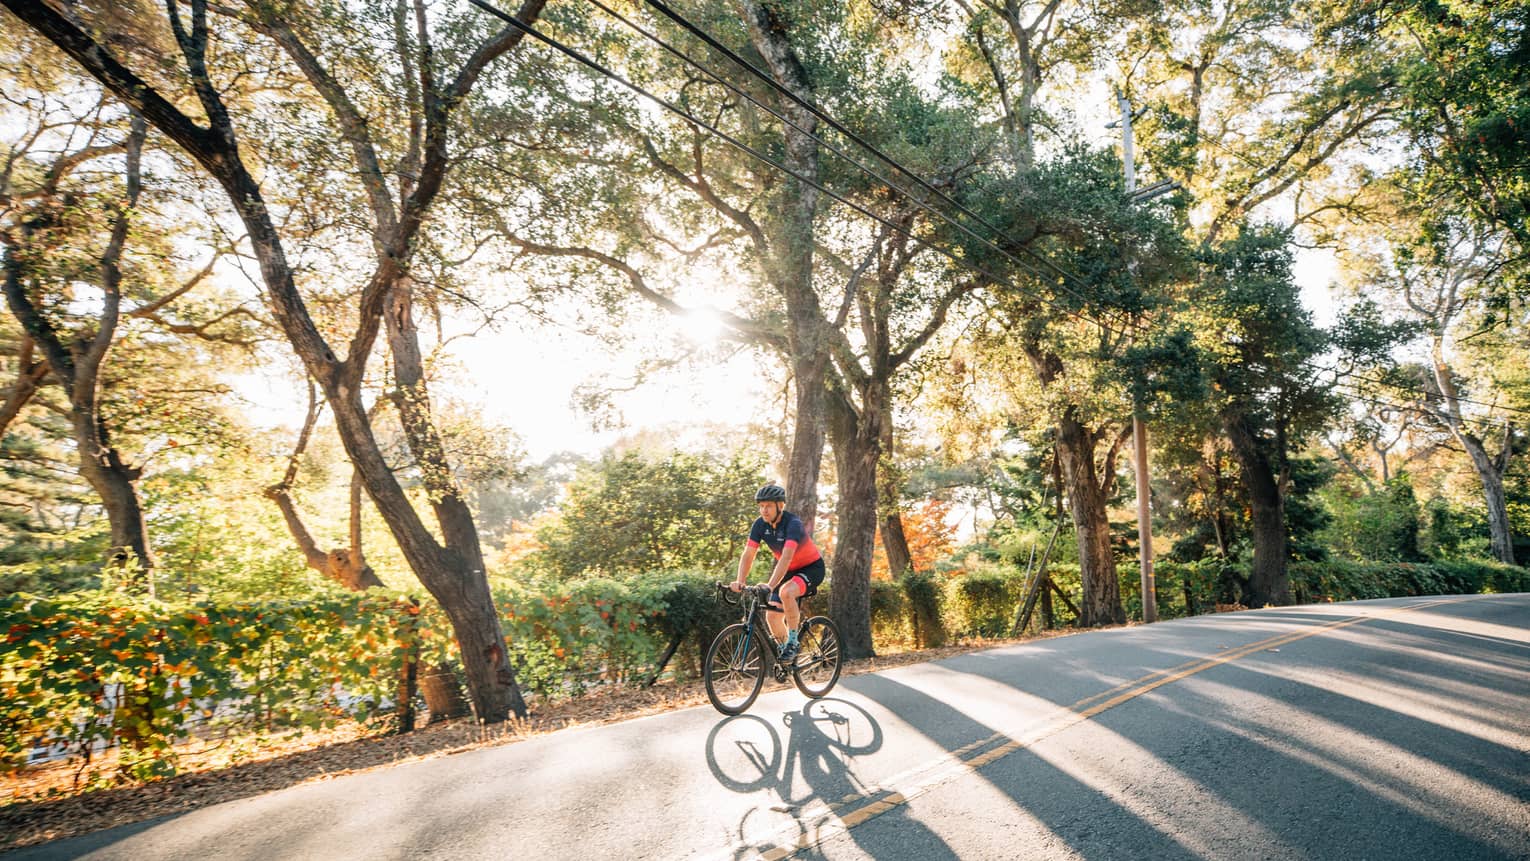 A person on a cycling bike riding along a rode next to bushes and trees.